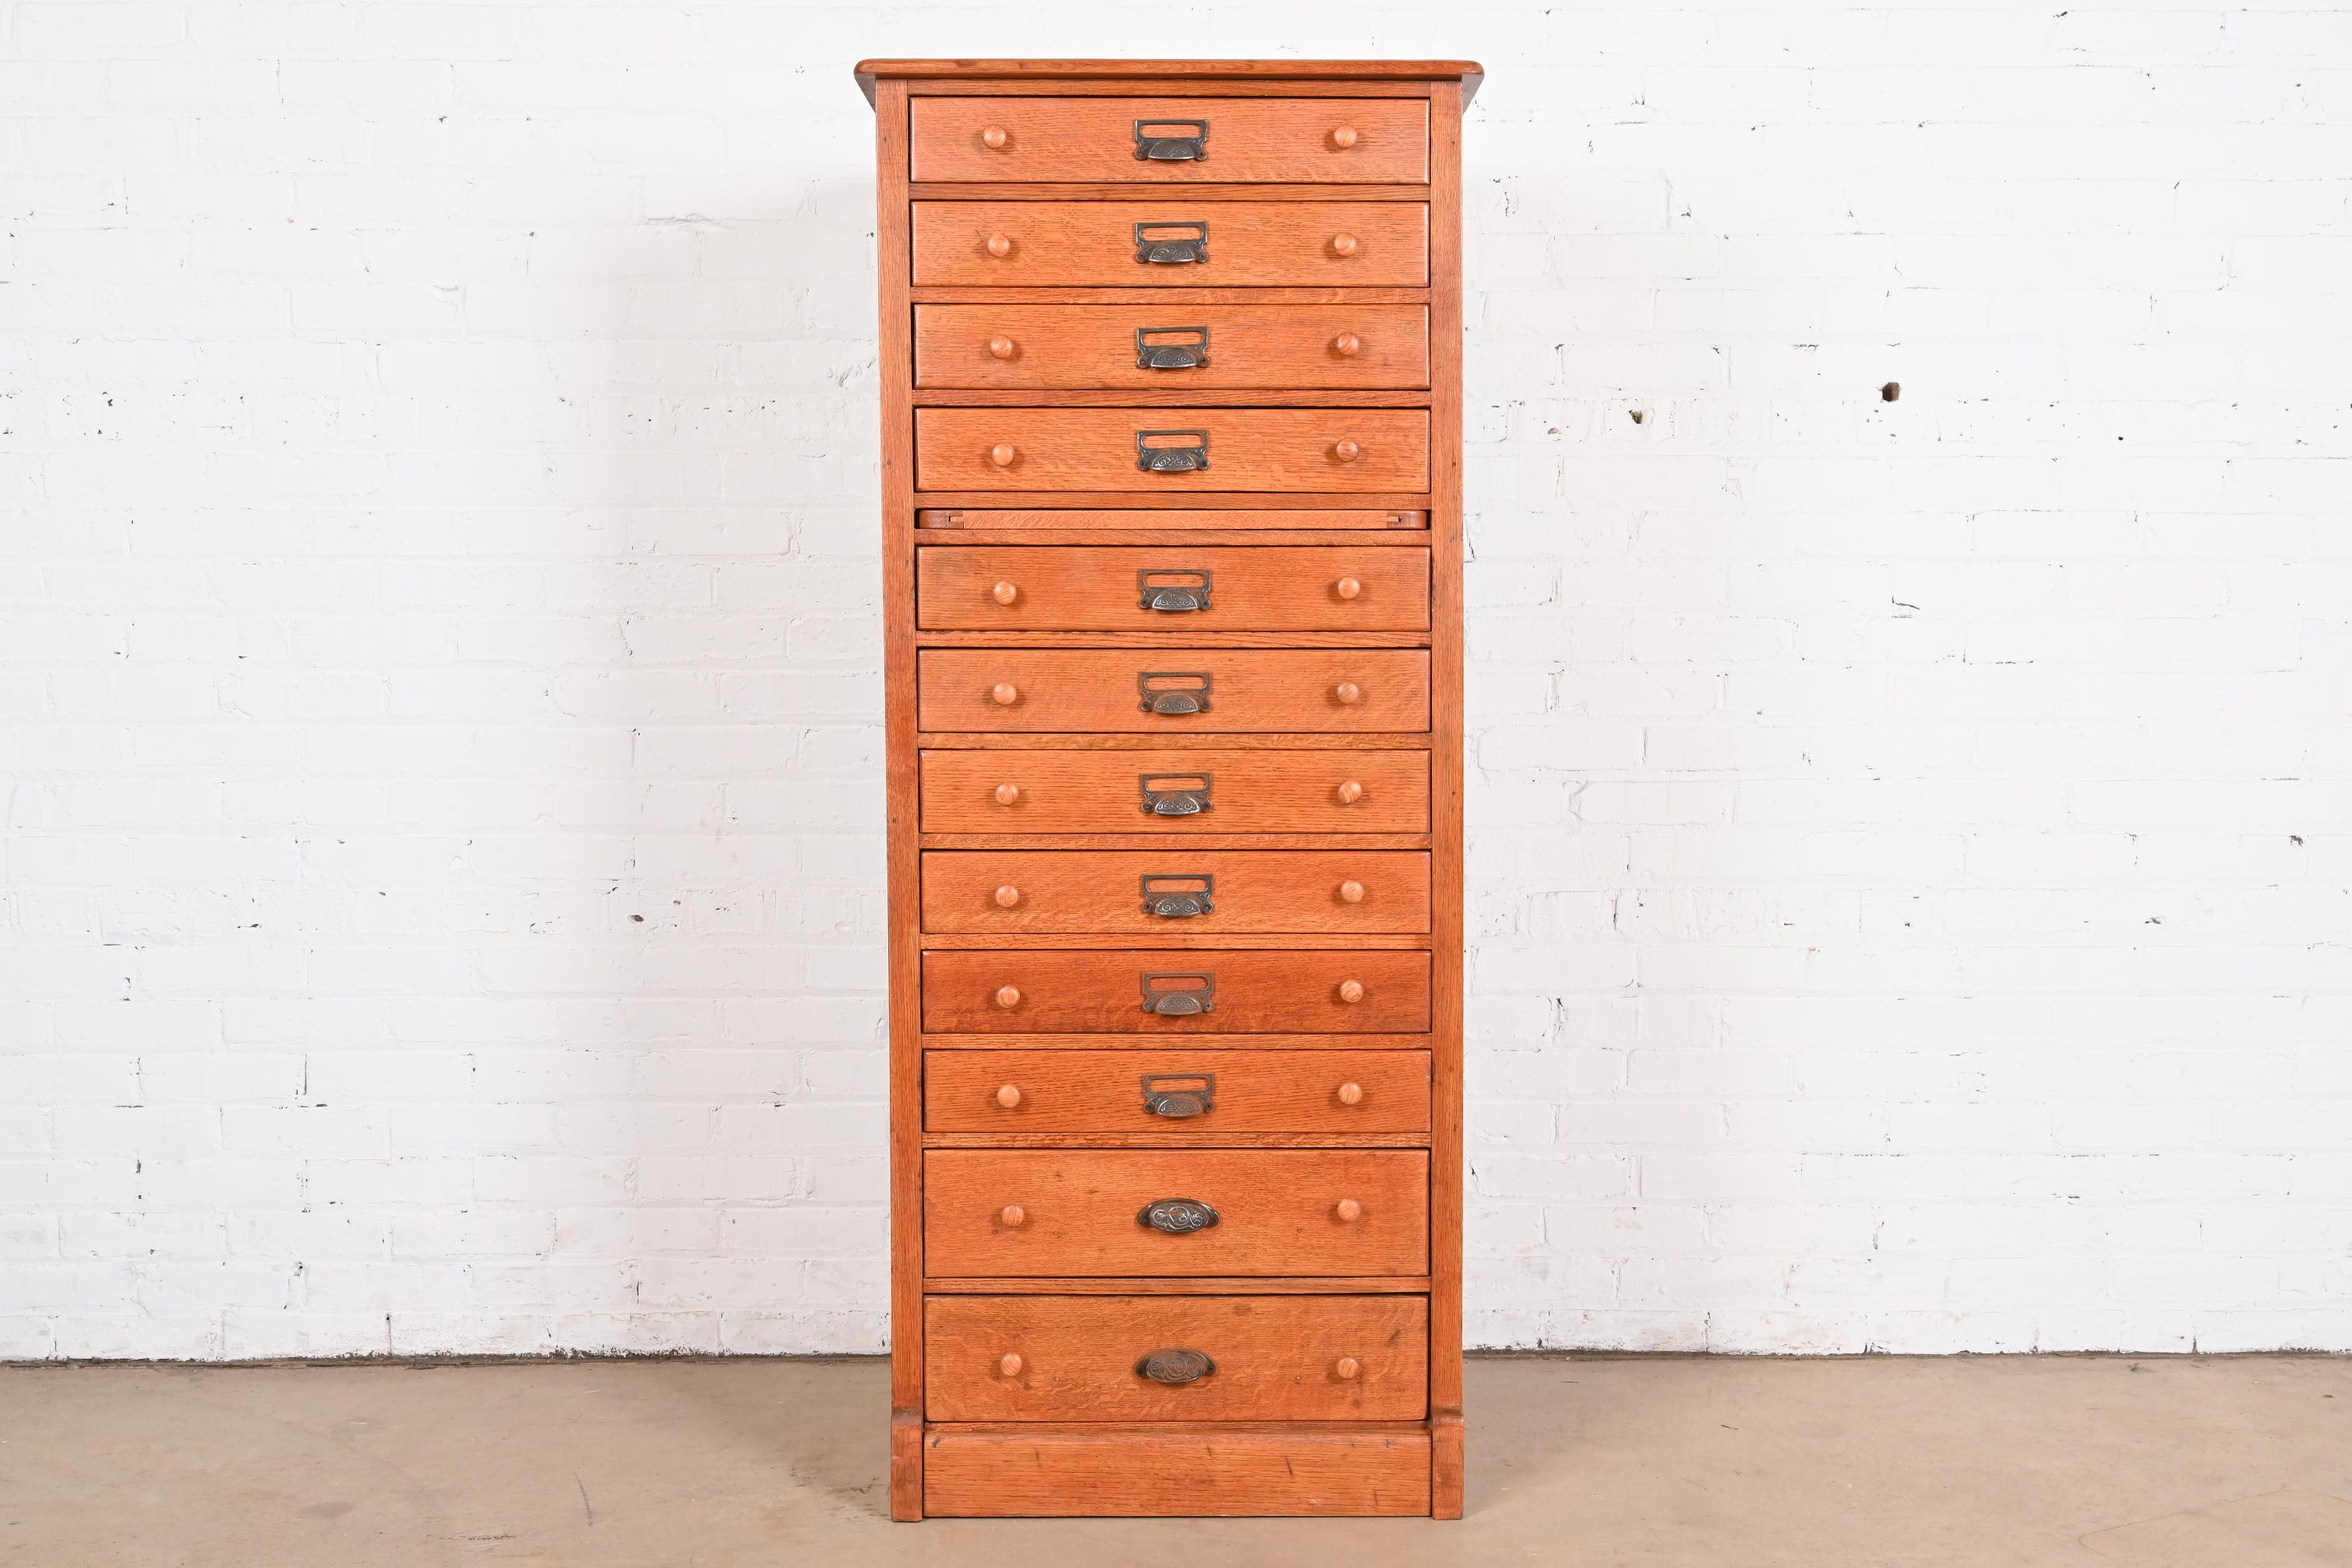 A rare antique Arts & Crafts or Late Victorian 12-drawer flat file cabinet or chest of drawers

USA, Circa 1900

Solid quartersawn oak, with iron hardware.

Measures: 25.5